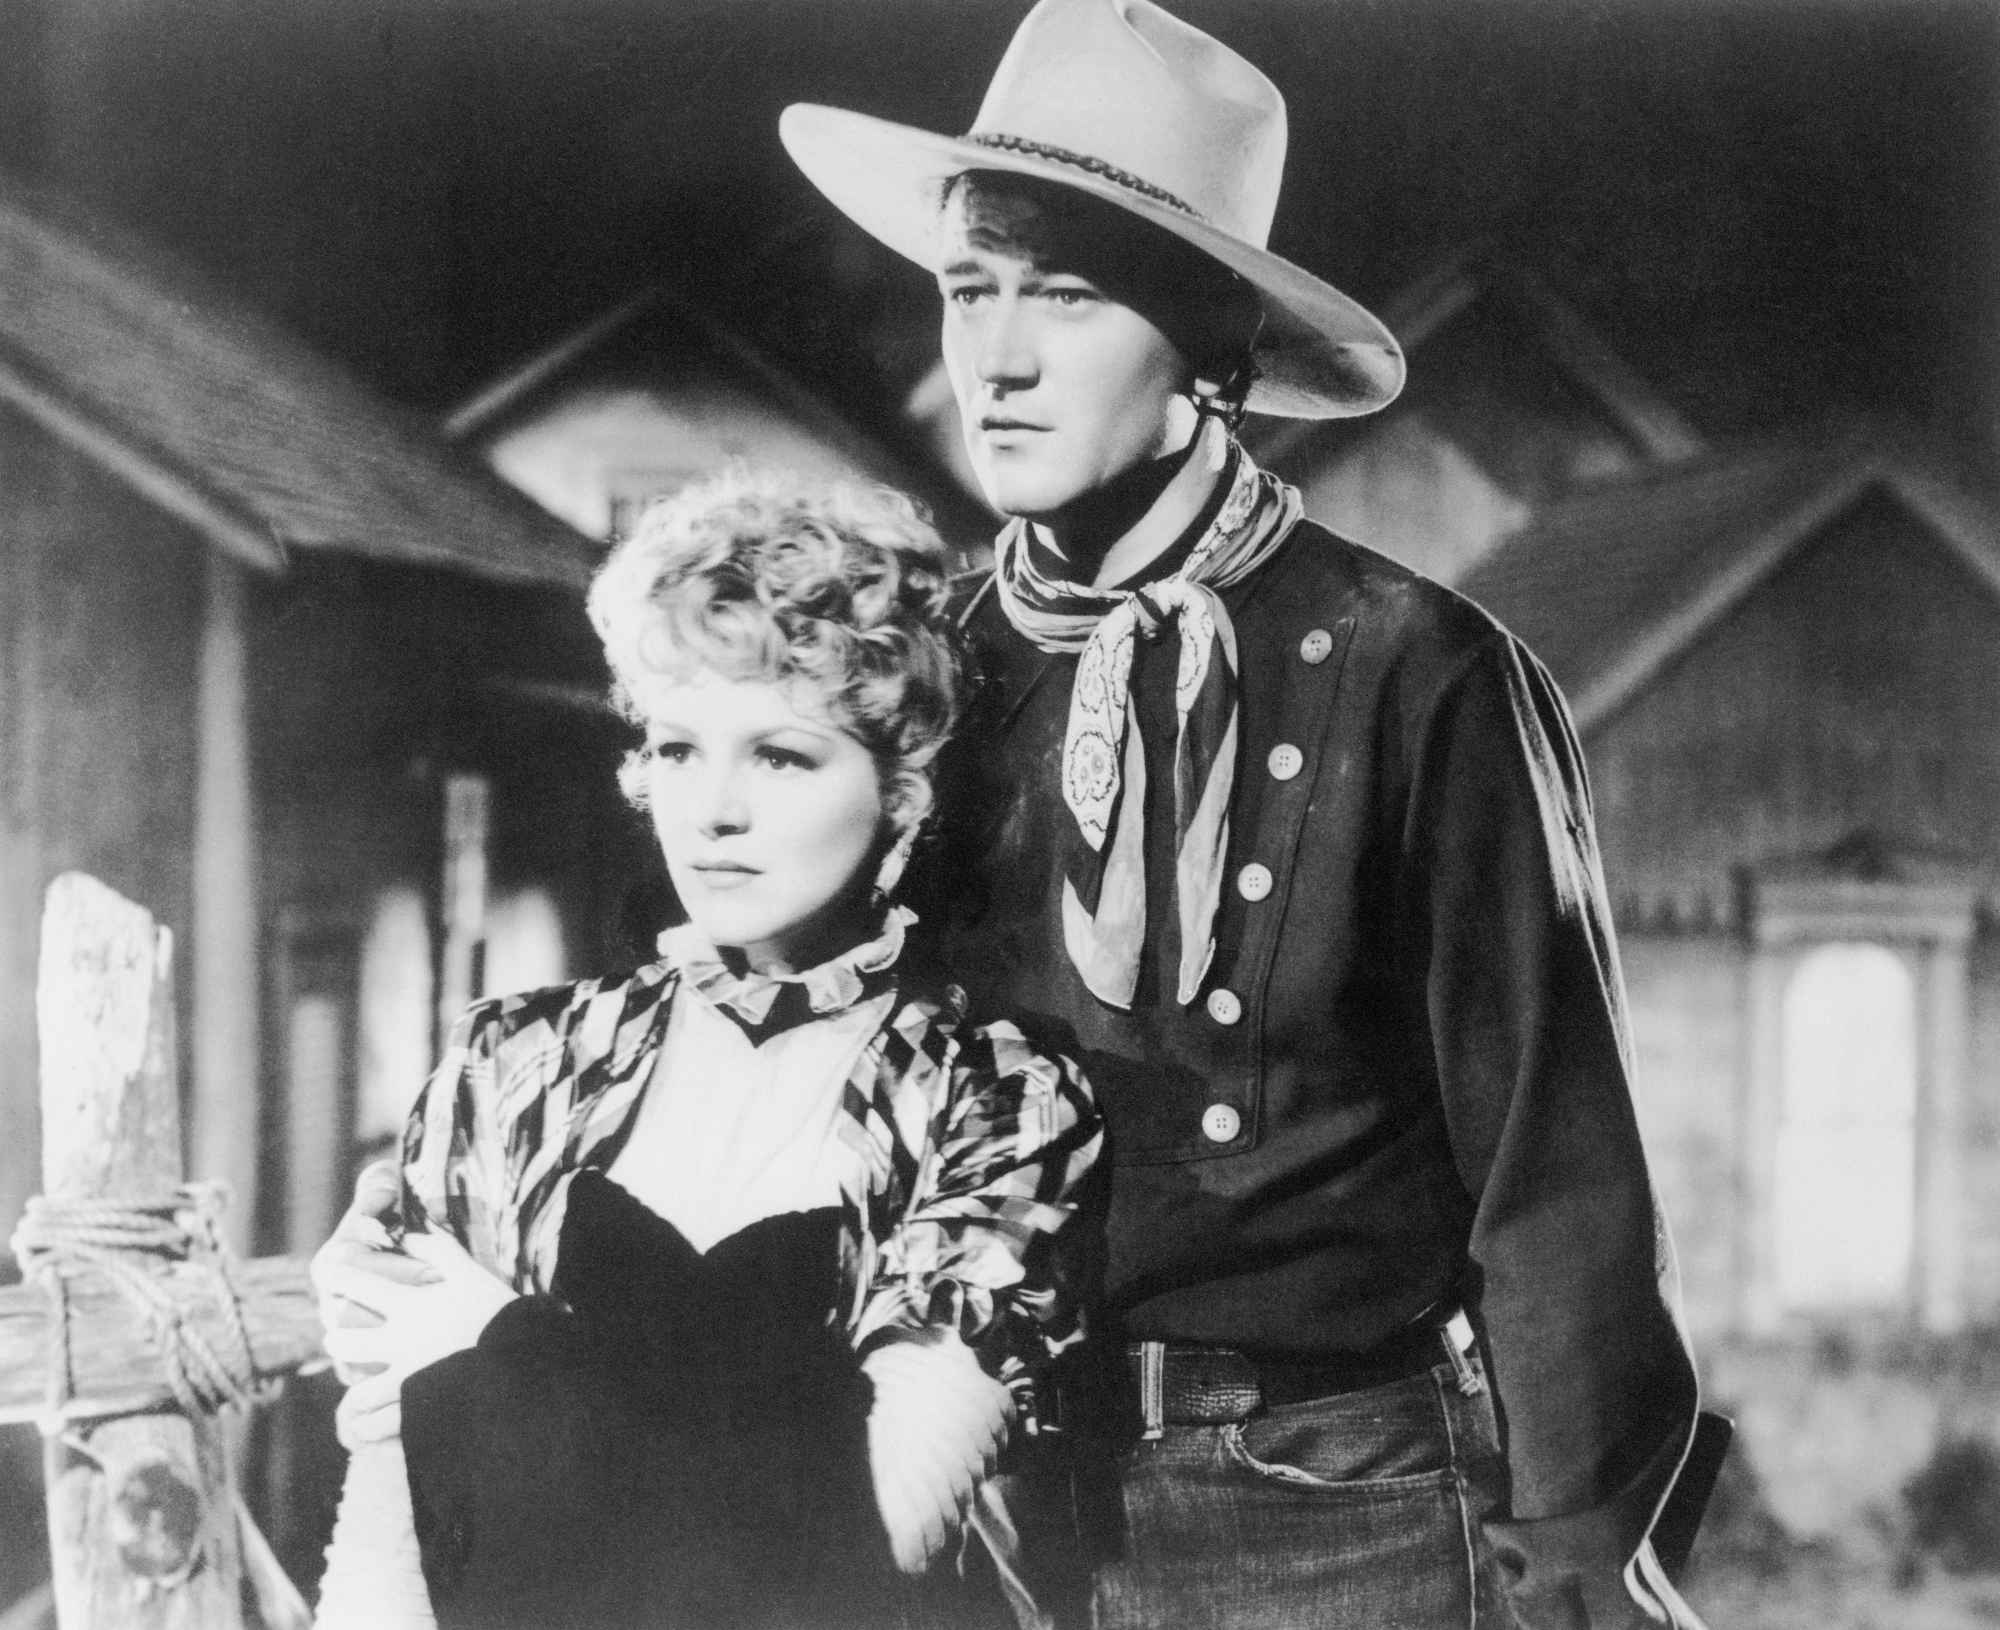 'Stagecoach' Claire Trevor as Dallas and John Wayne as Ringo Kid in black-and-white movies. He has his arm around her, looking concerned.